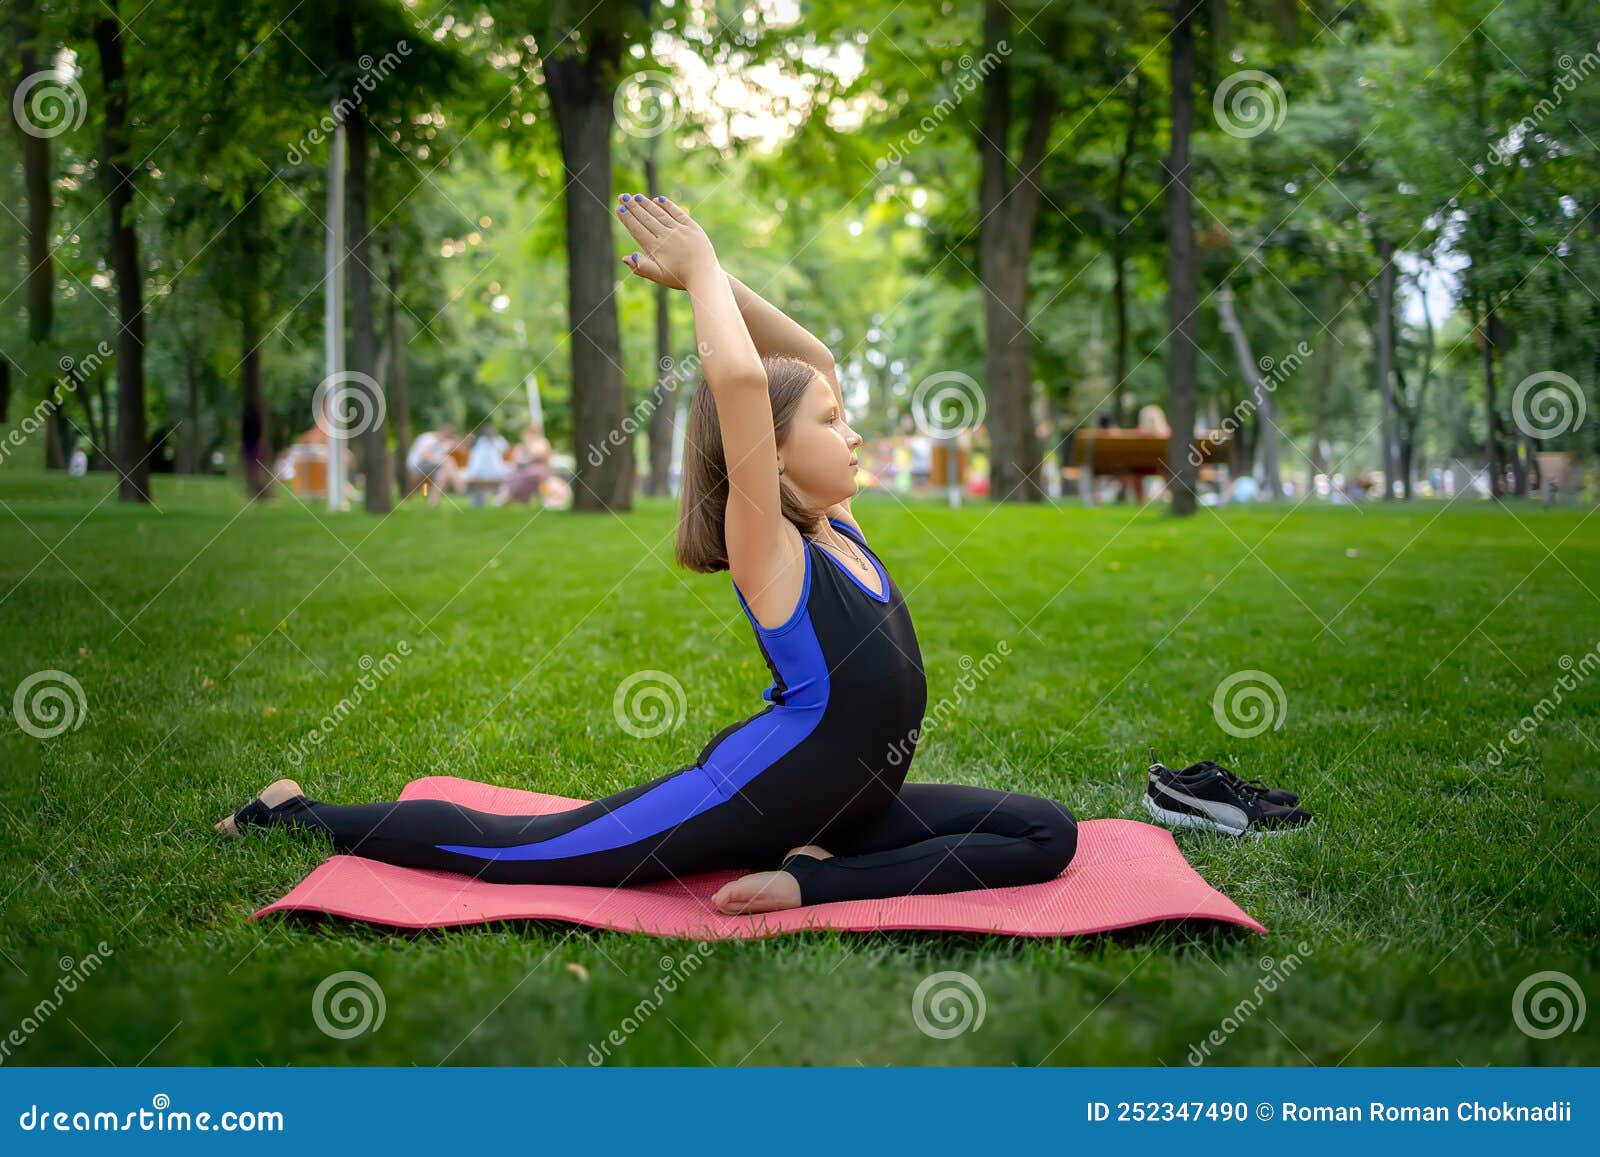 A Little Girl in the Park Performs Yoga Elements by Bending Cullen and ...